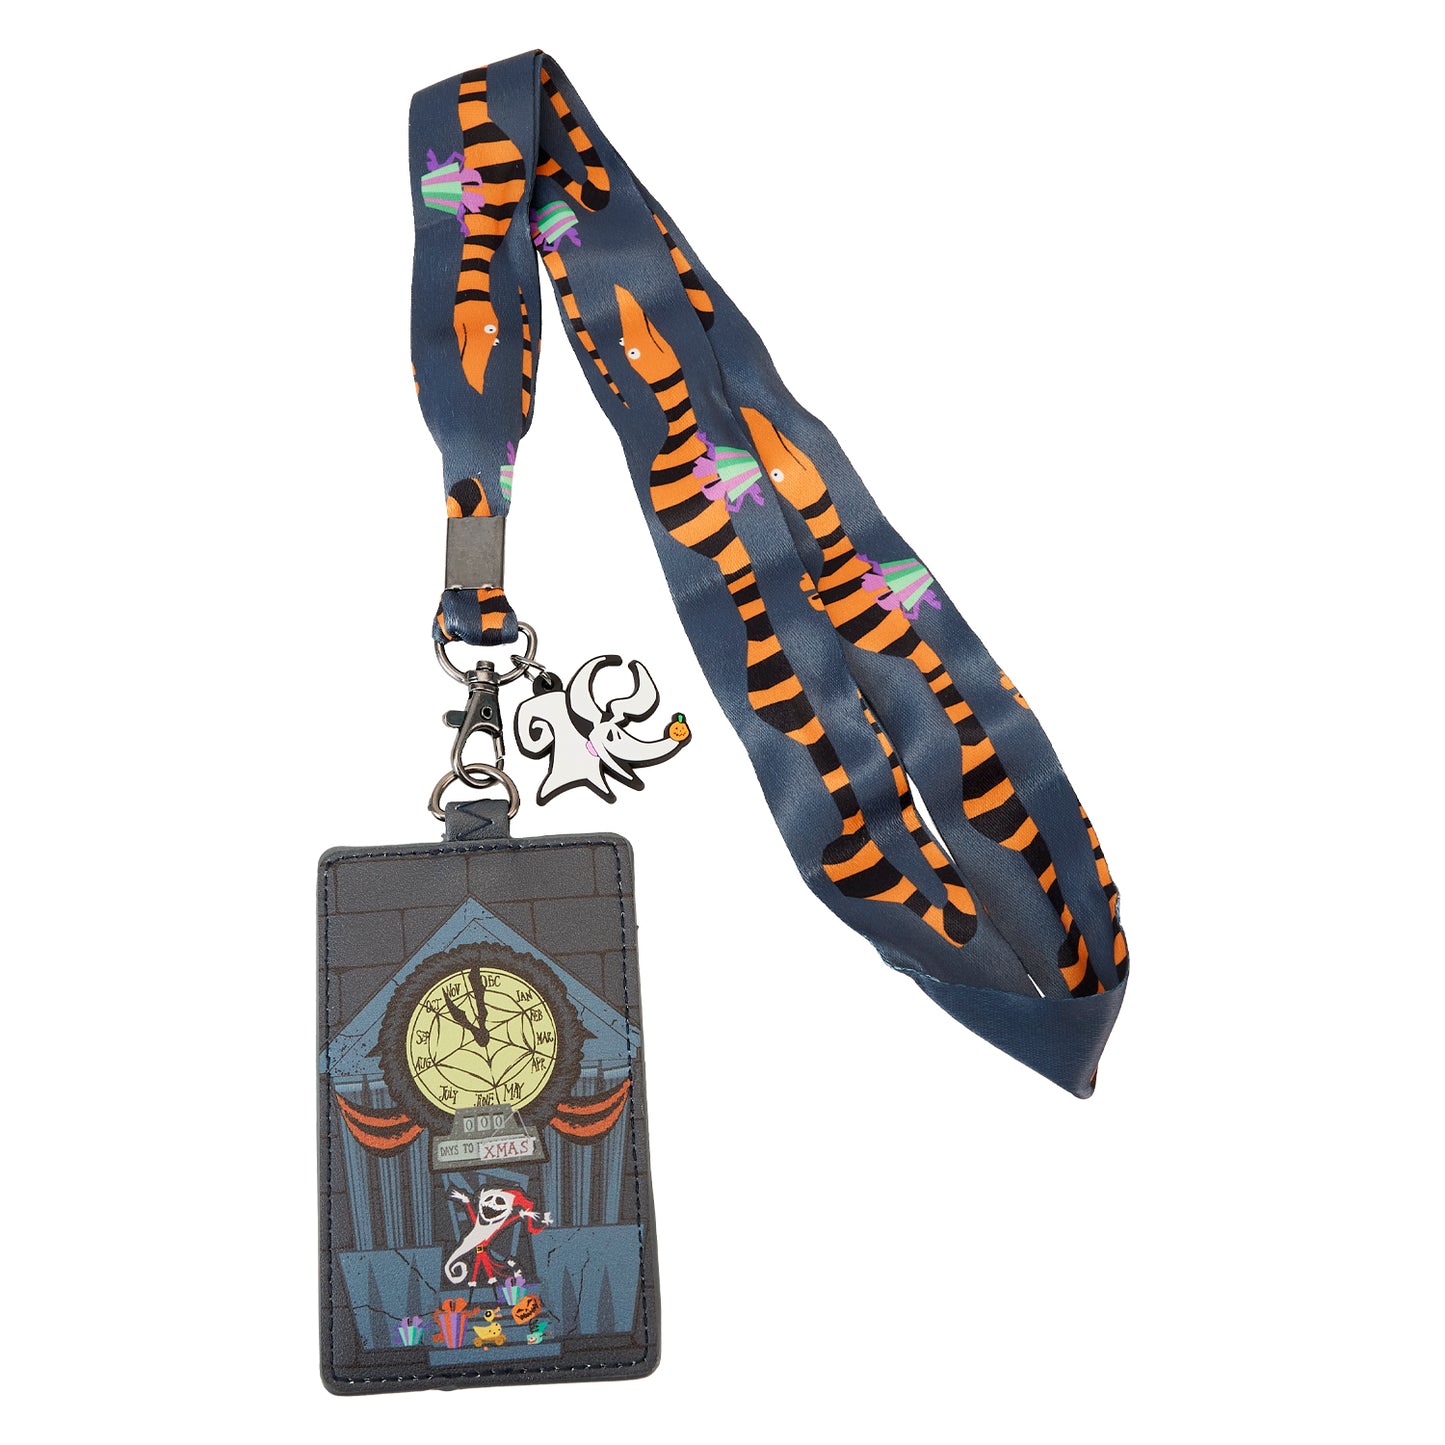 Nightmare Before Christmas Lanyard with Cardholder